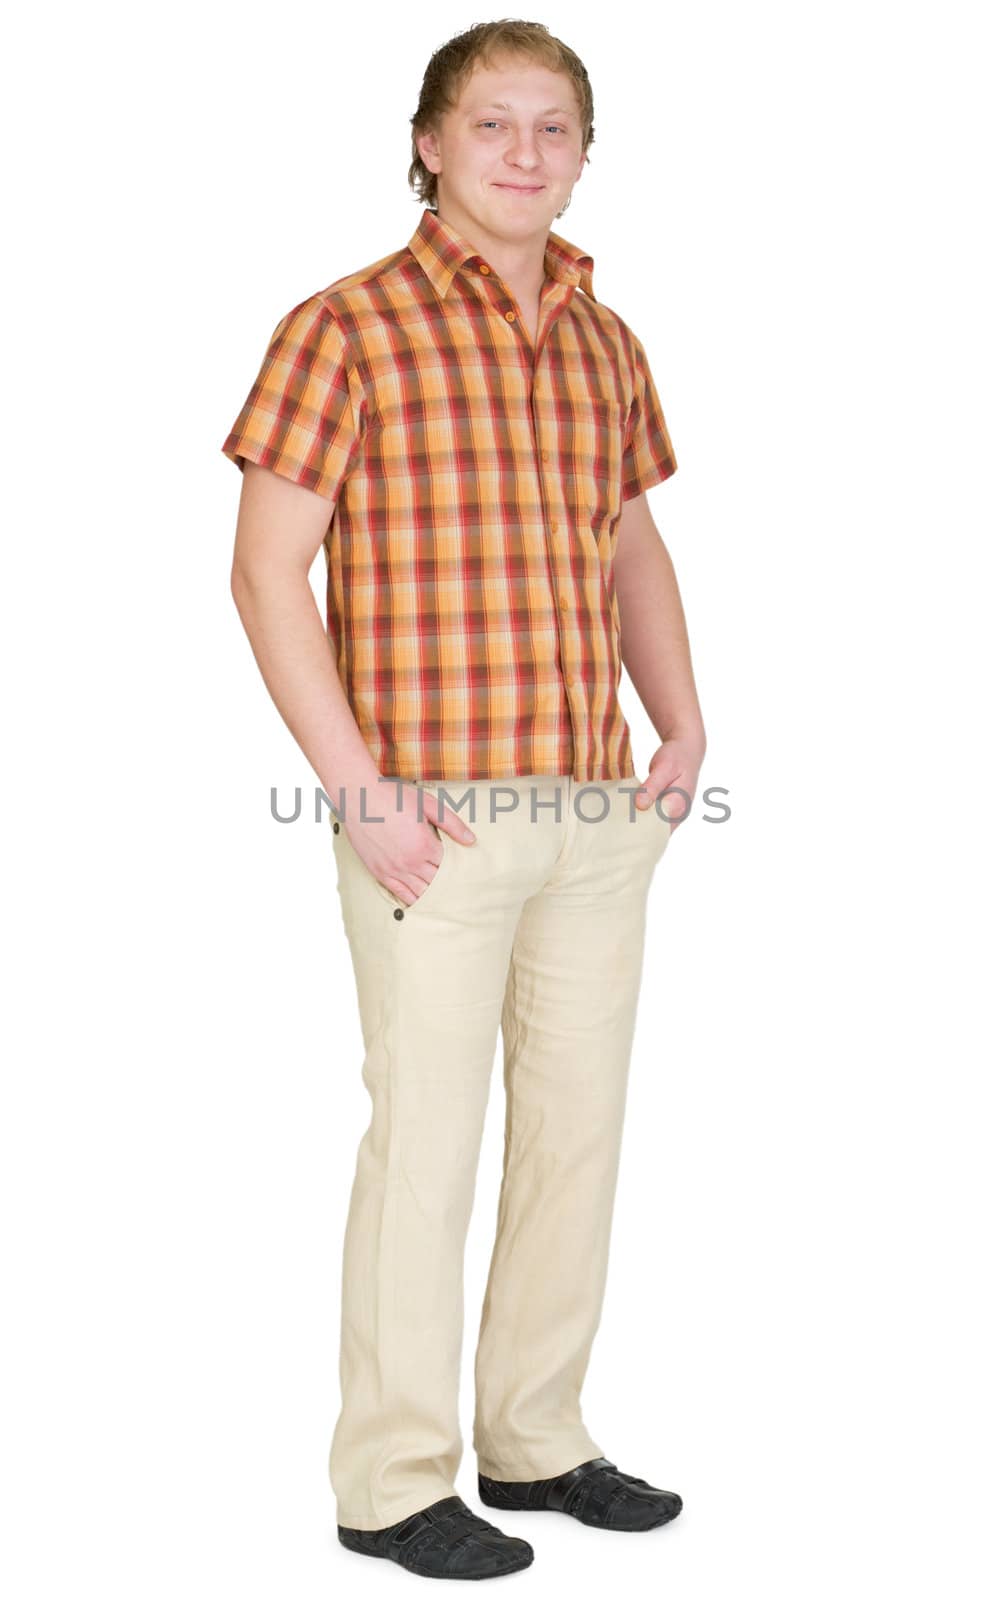 Portrait of the guy in a checkered shirt on white background